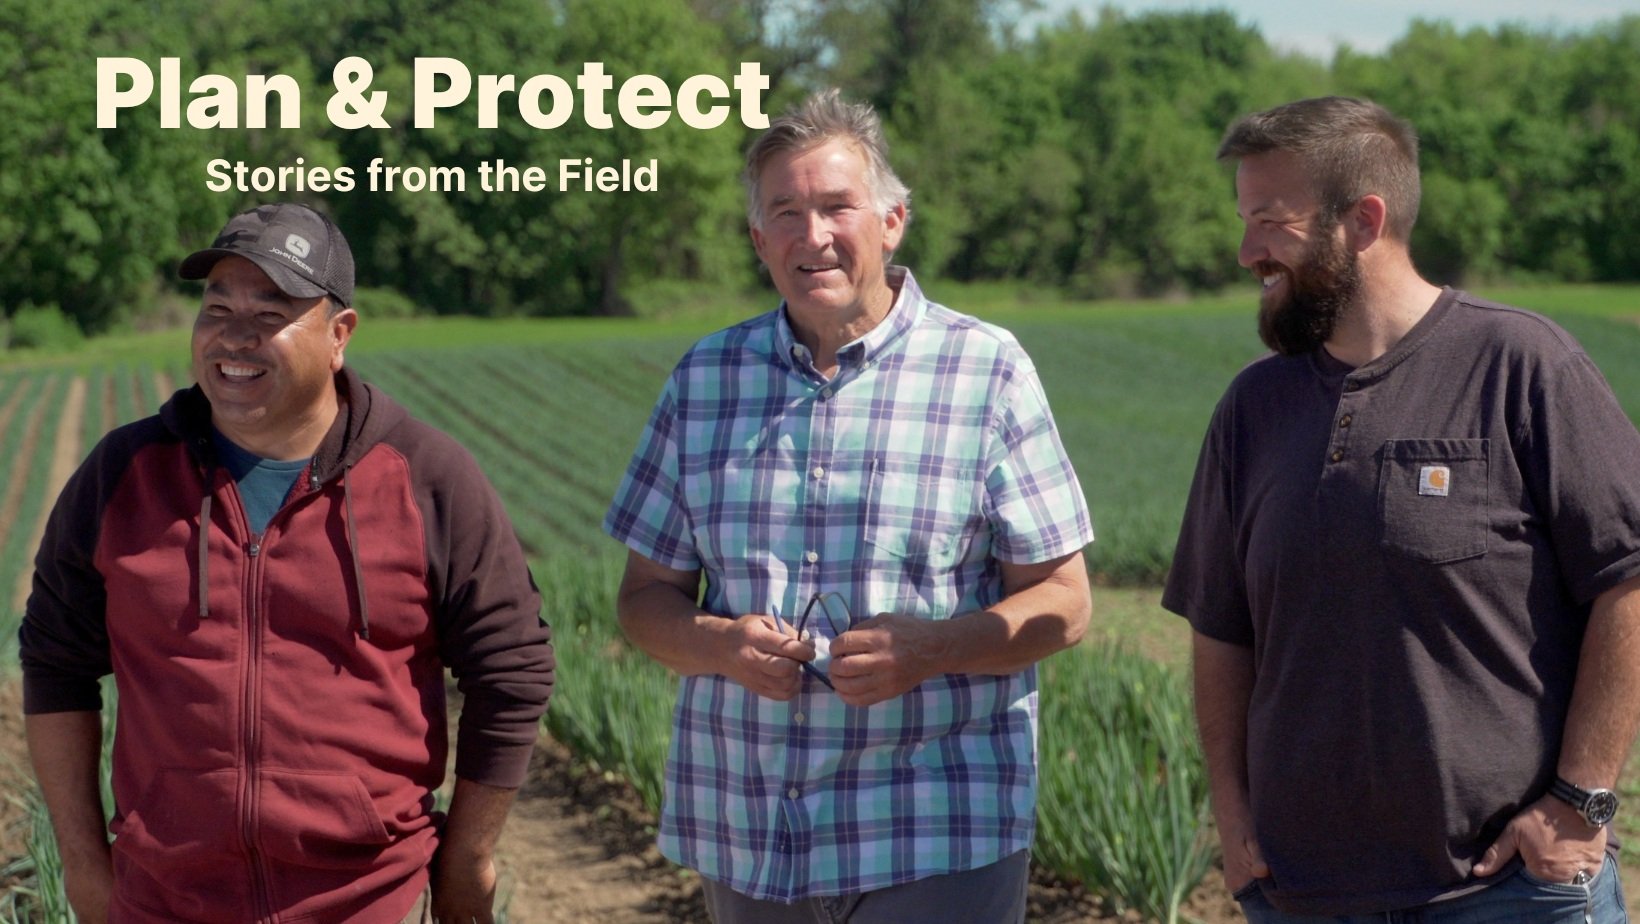 Farmers Oscar Lopez, Skip Gray, and Kevin Gray share a laugh in front of an onion field at GFI